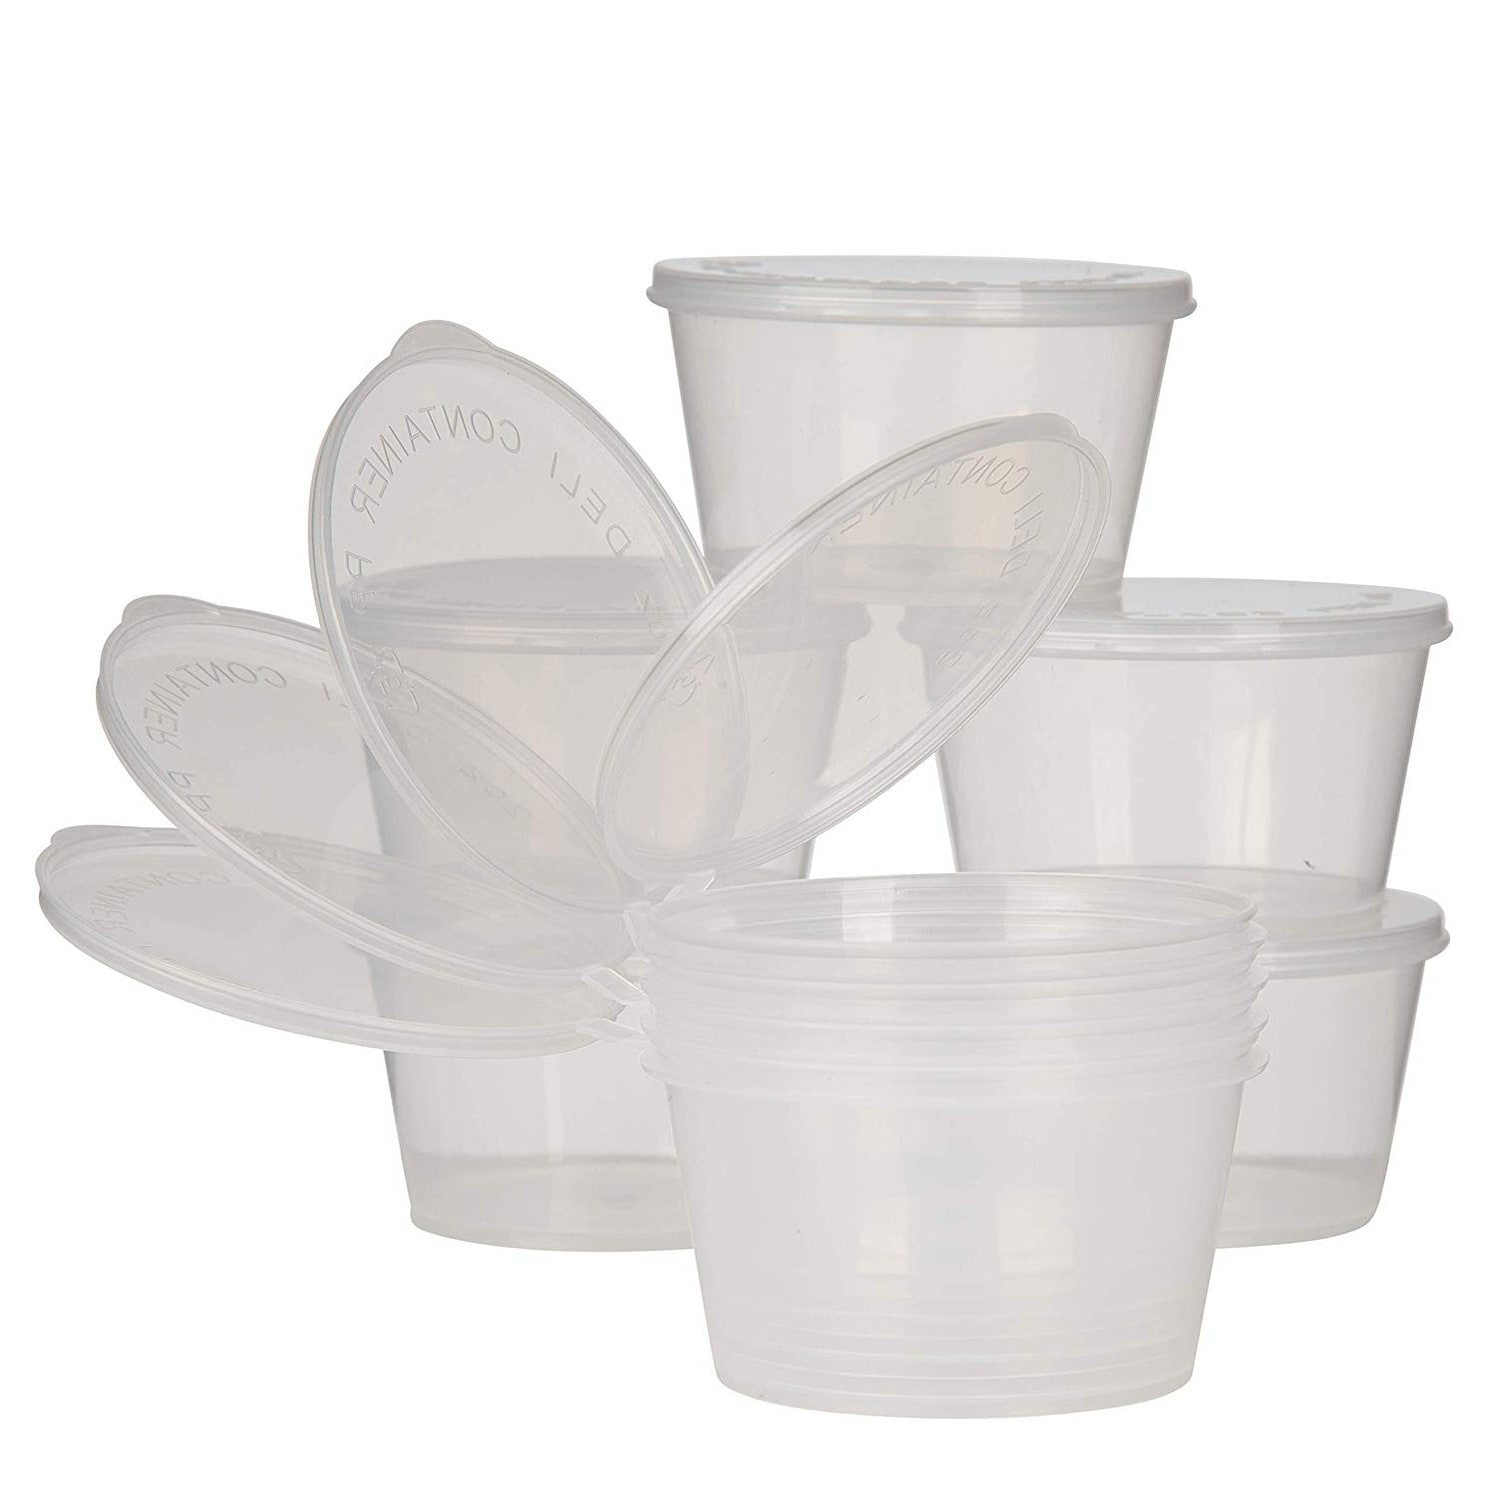 https://ak1.ostkcdn.com/images/products/29043511/Plastic-Condiment-Cups-with-Attached-Leak-Resistant-Lid-100-Pack-Clear-Portion-Container-for-Condiments-8145df38-6248-4083-8f57-f947b227ff6e.jpg